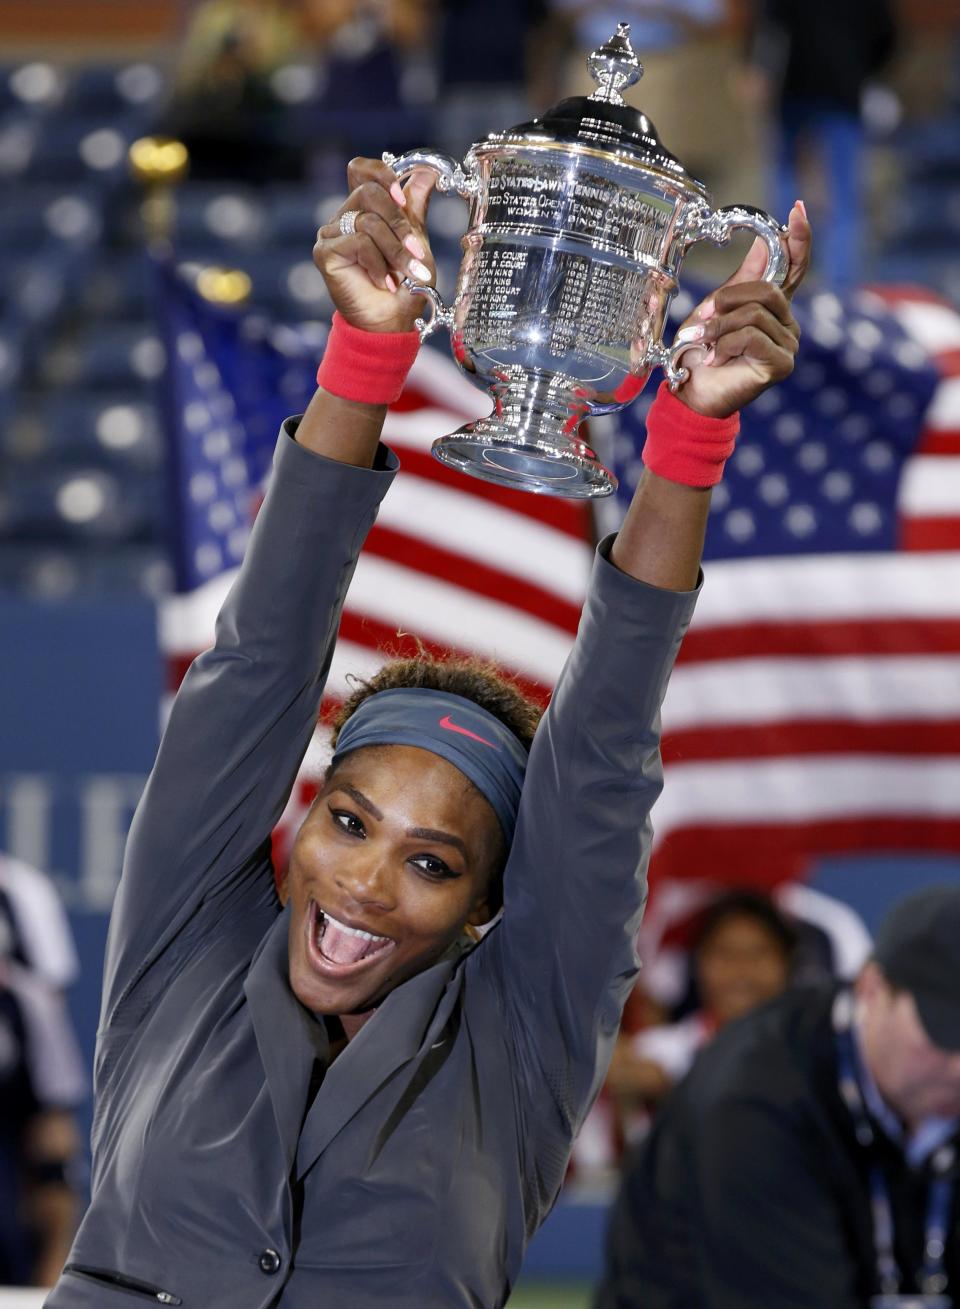 Serena Williams of the U.S. raises her trophy after defeating Victoria Azarenka of Belarus in their women's singles final match at the U.S. Open tennis championships in New York September 8, 2013. REUTERS/Mike Segar (UNITED STATES - Tags: SPORT TENNIS TPX IMAGES OF THE DAY)